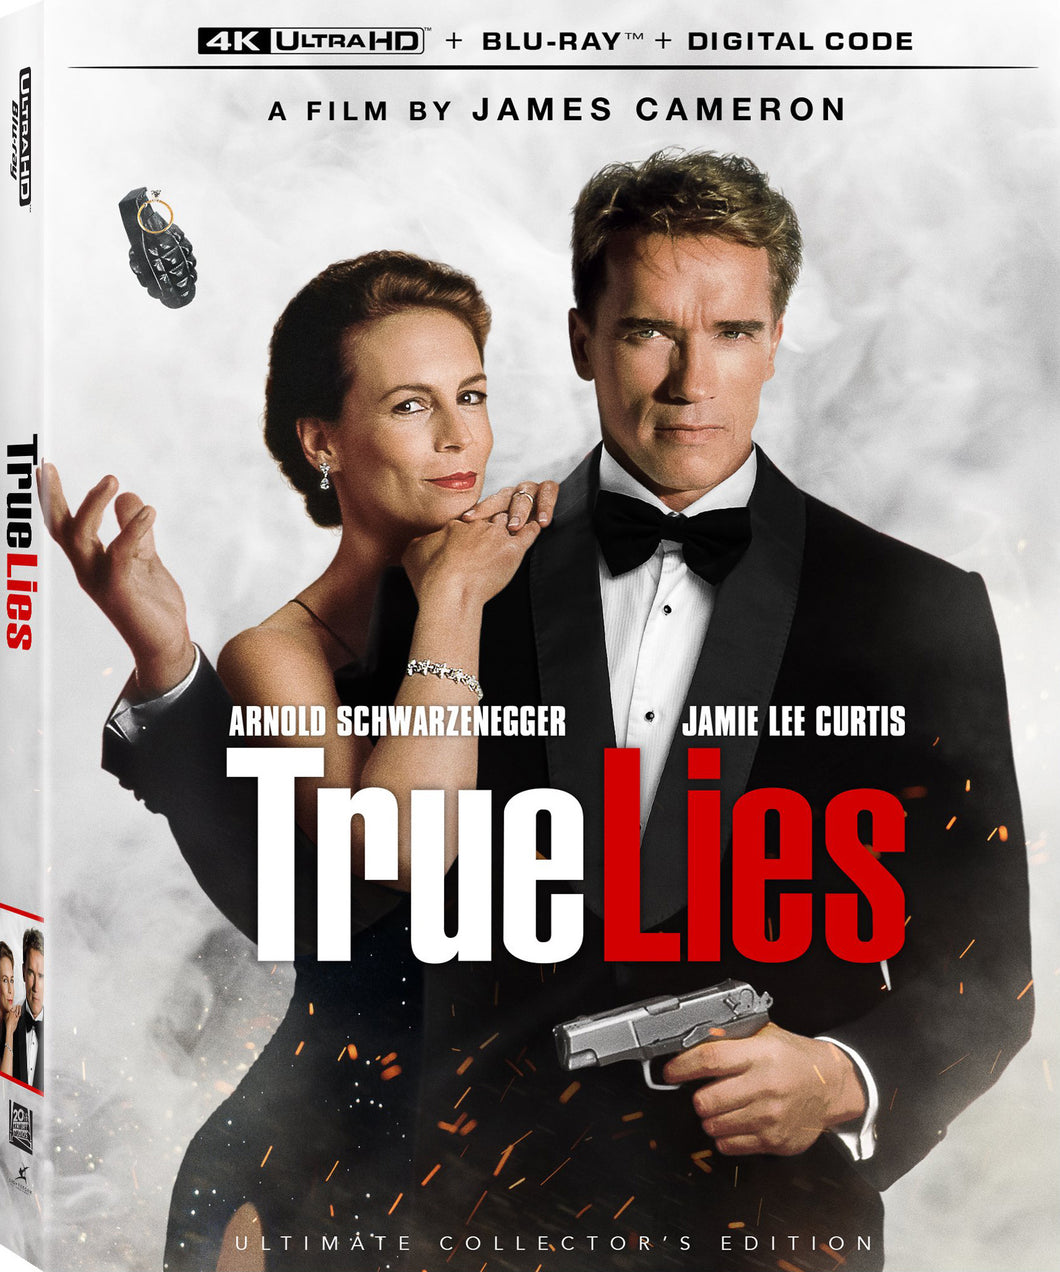  True Lies 4K Ultimate Collector's Edition (VF + STFR) (1994) - front cover